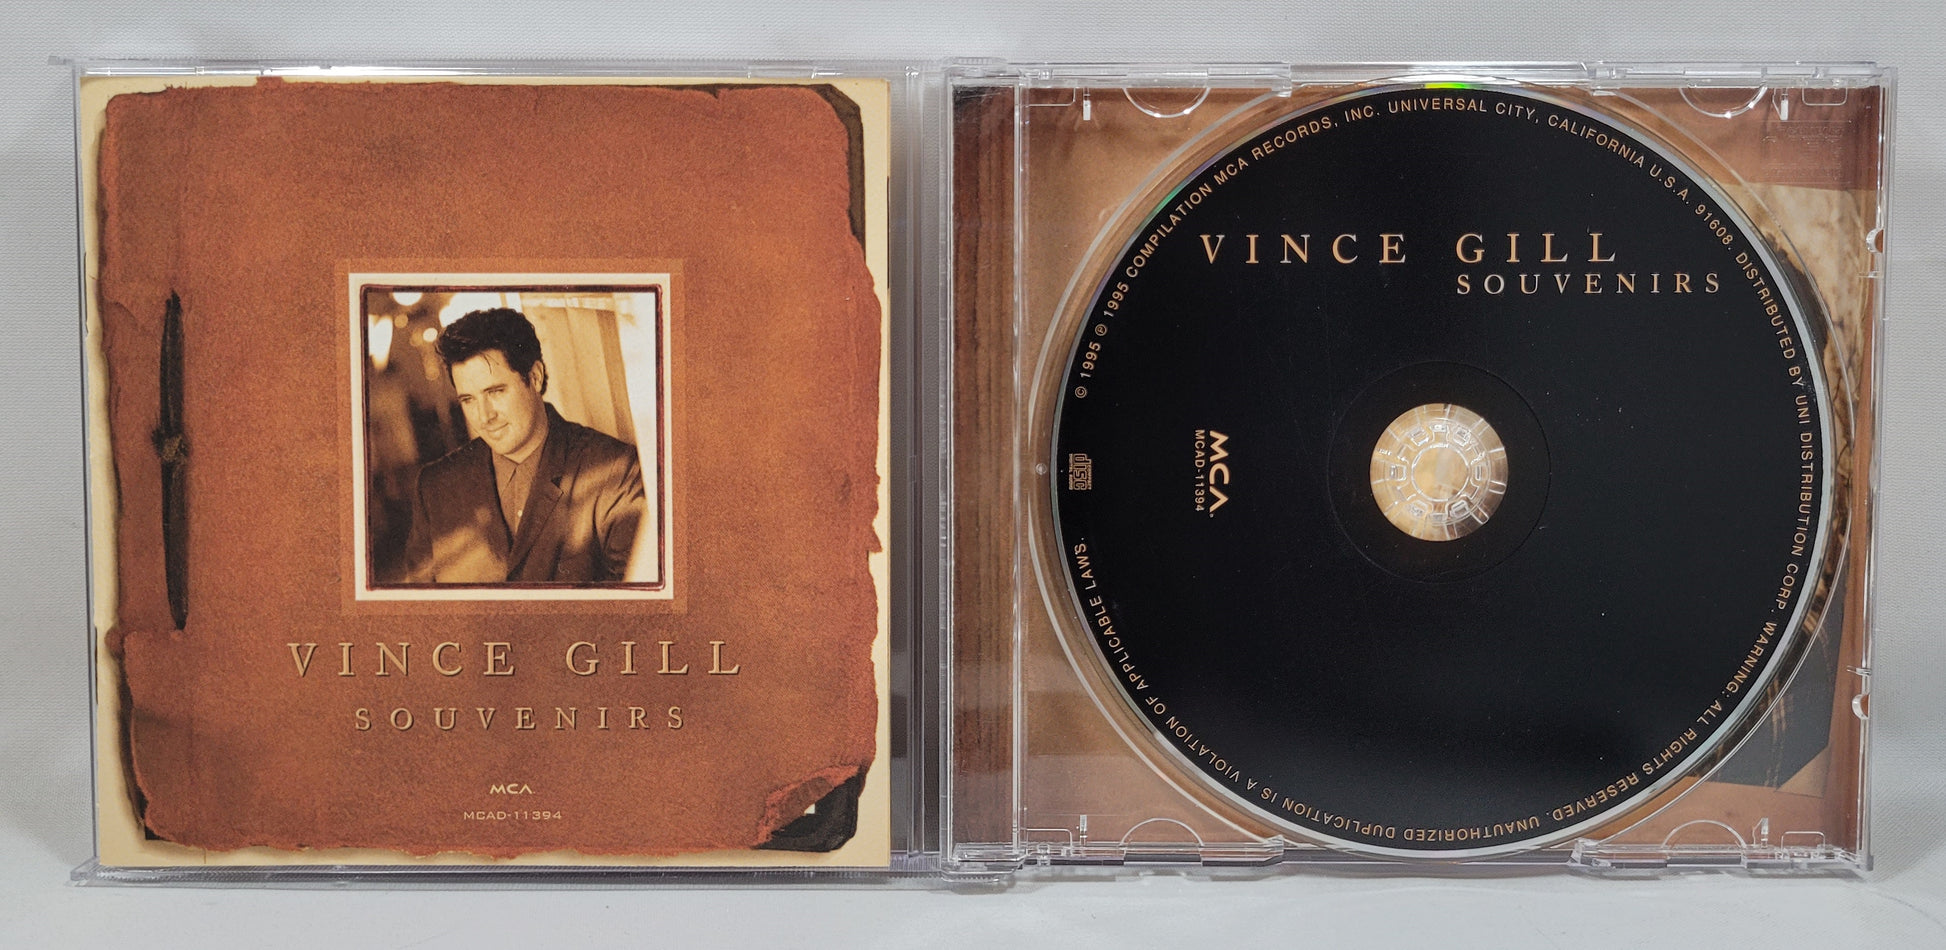 Vince Gill - Souvenirs [1995 Compilation] [Used CD]